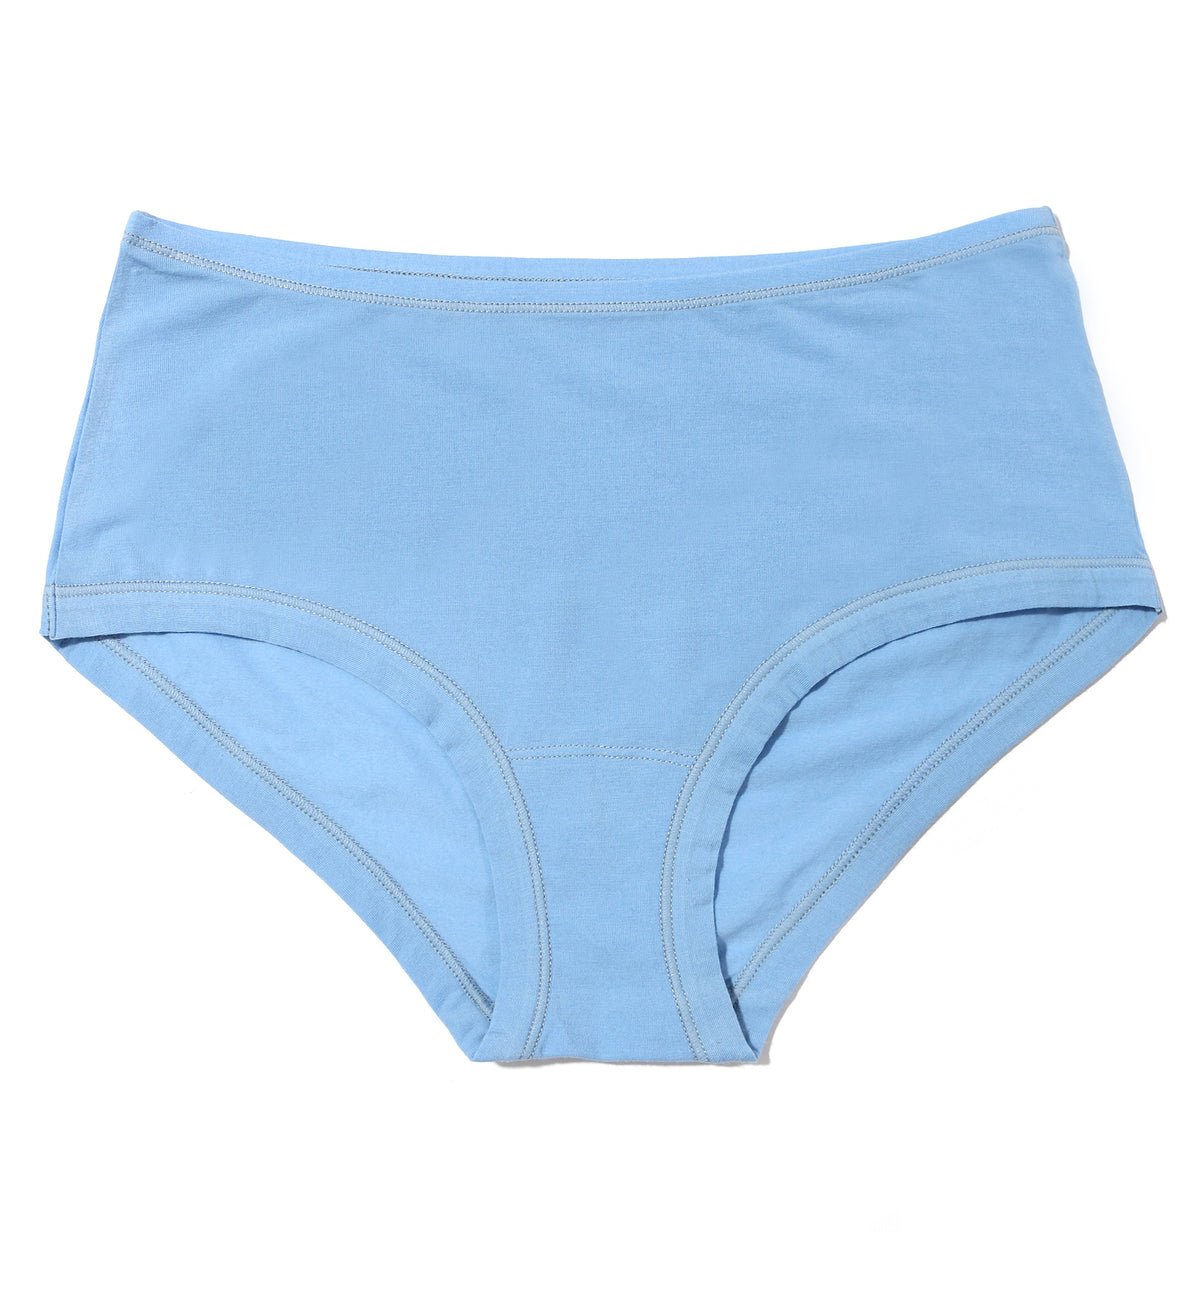 Hanky Panky Play Cotton Boyshort (721284),XS/S,Partly Cloudy - Partly Cloudy,XS/S